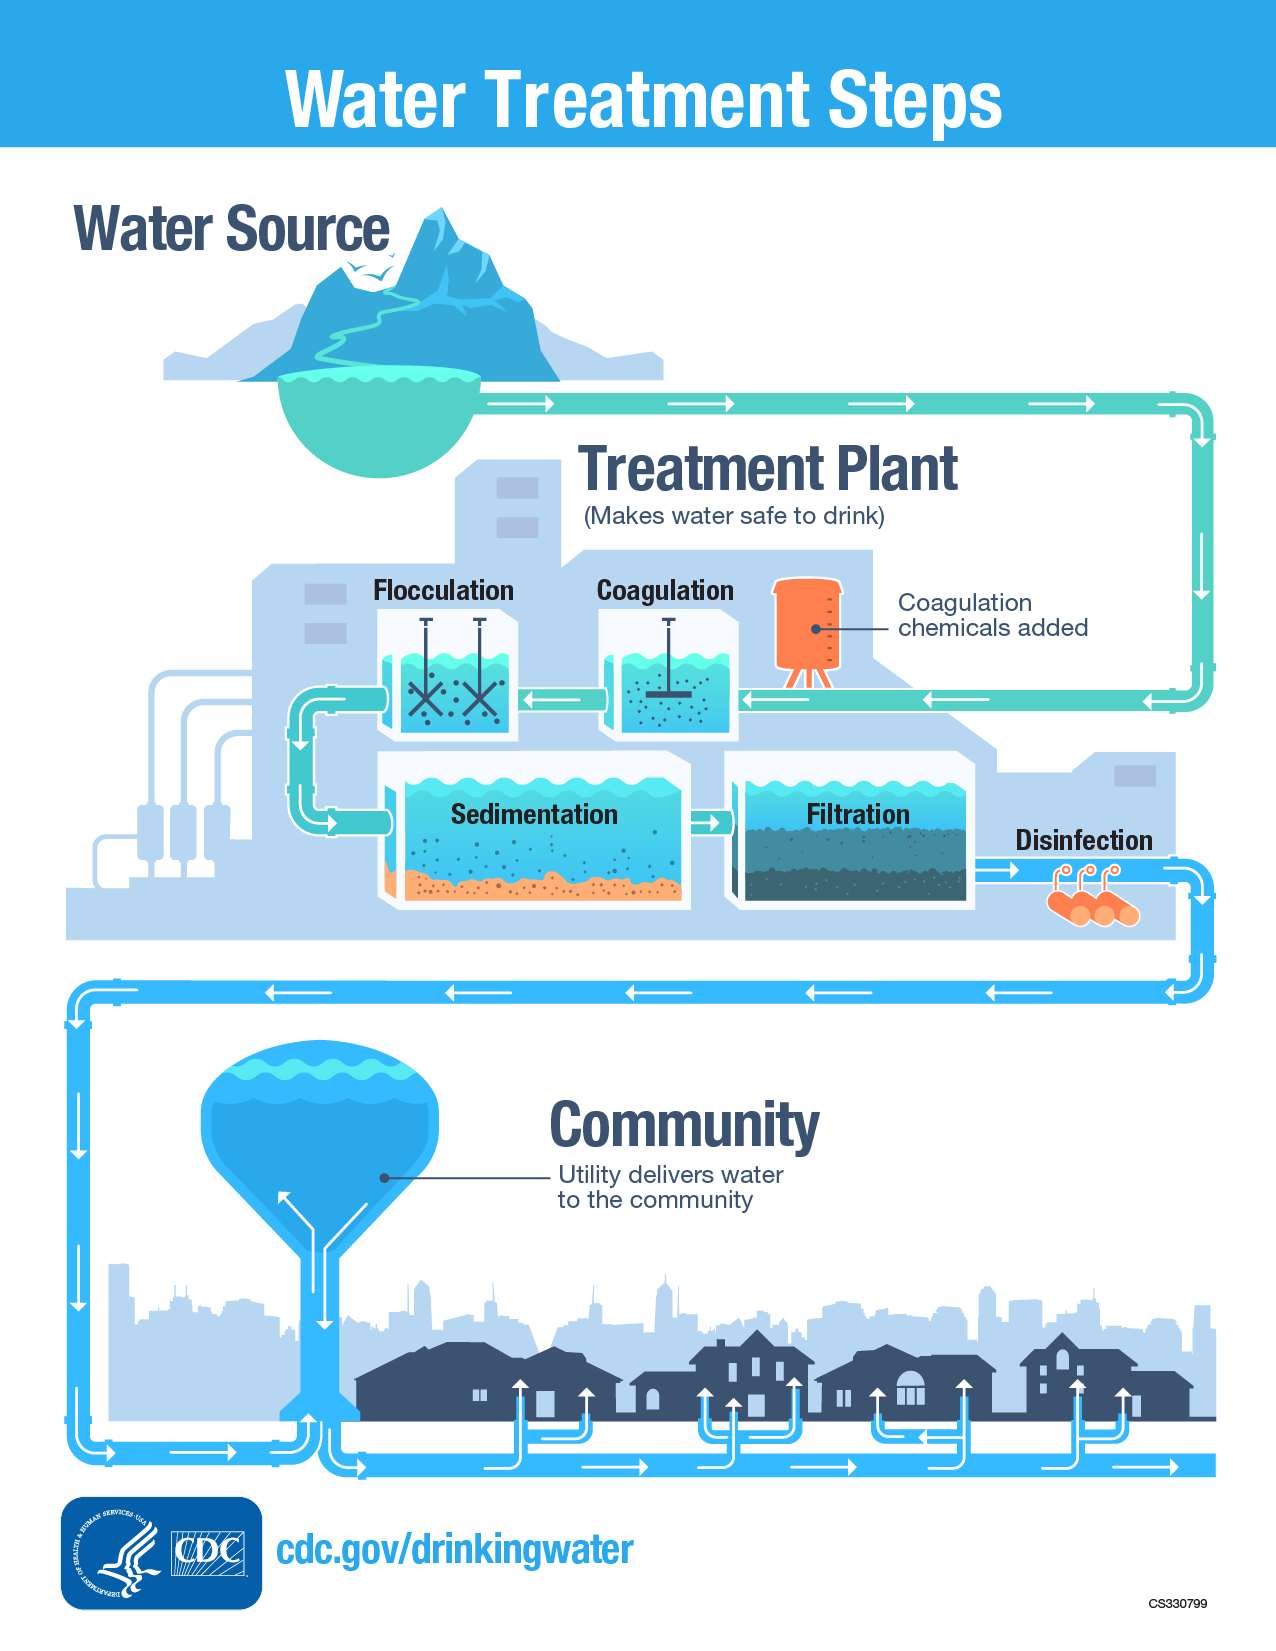 How Does Water Filtration Work?